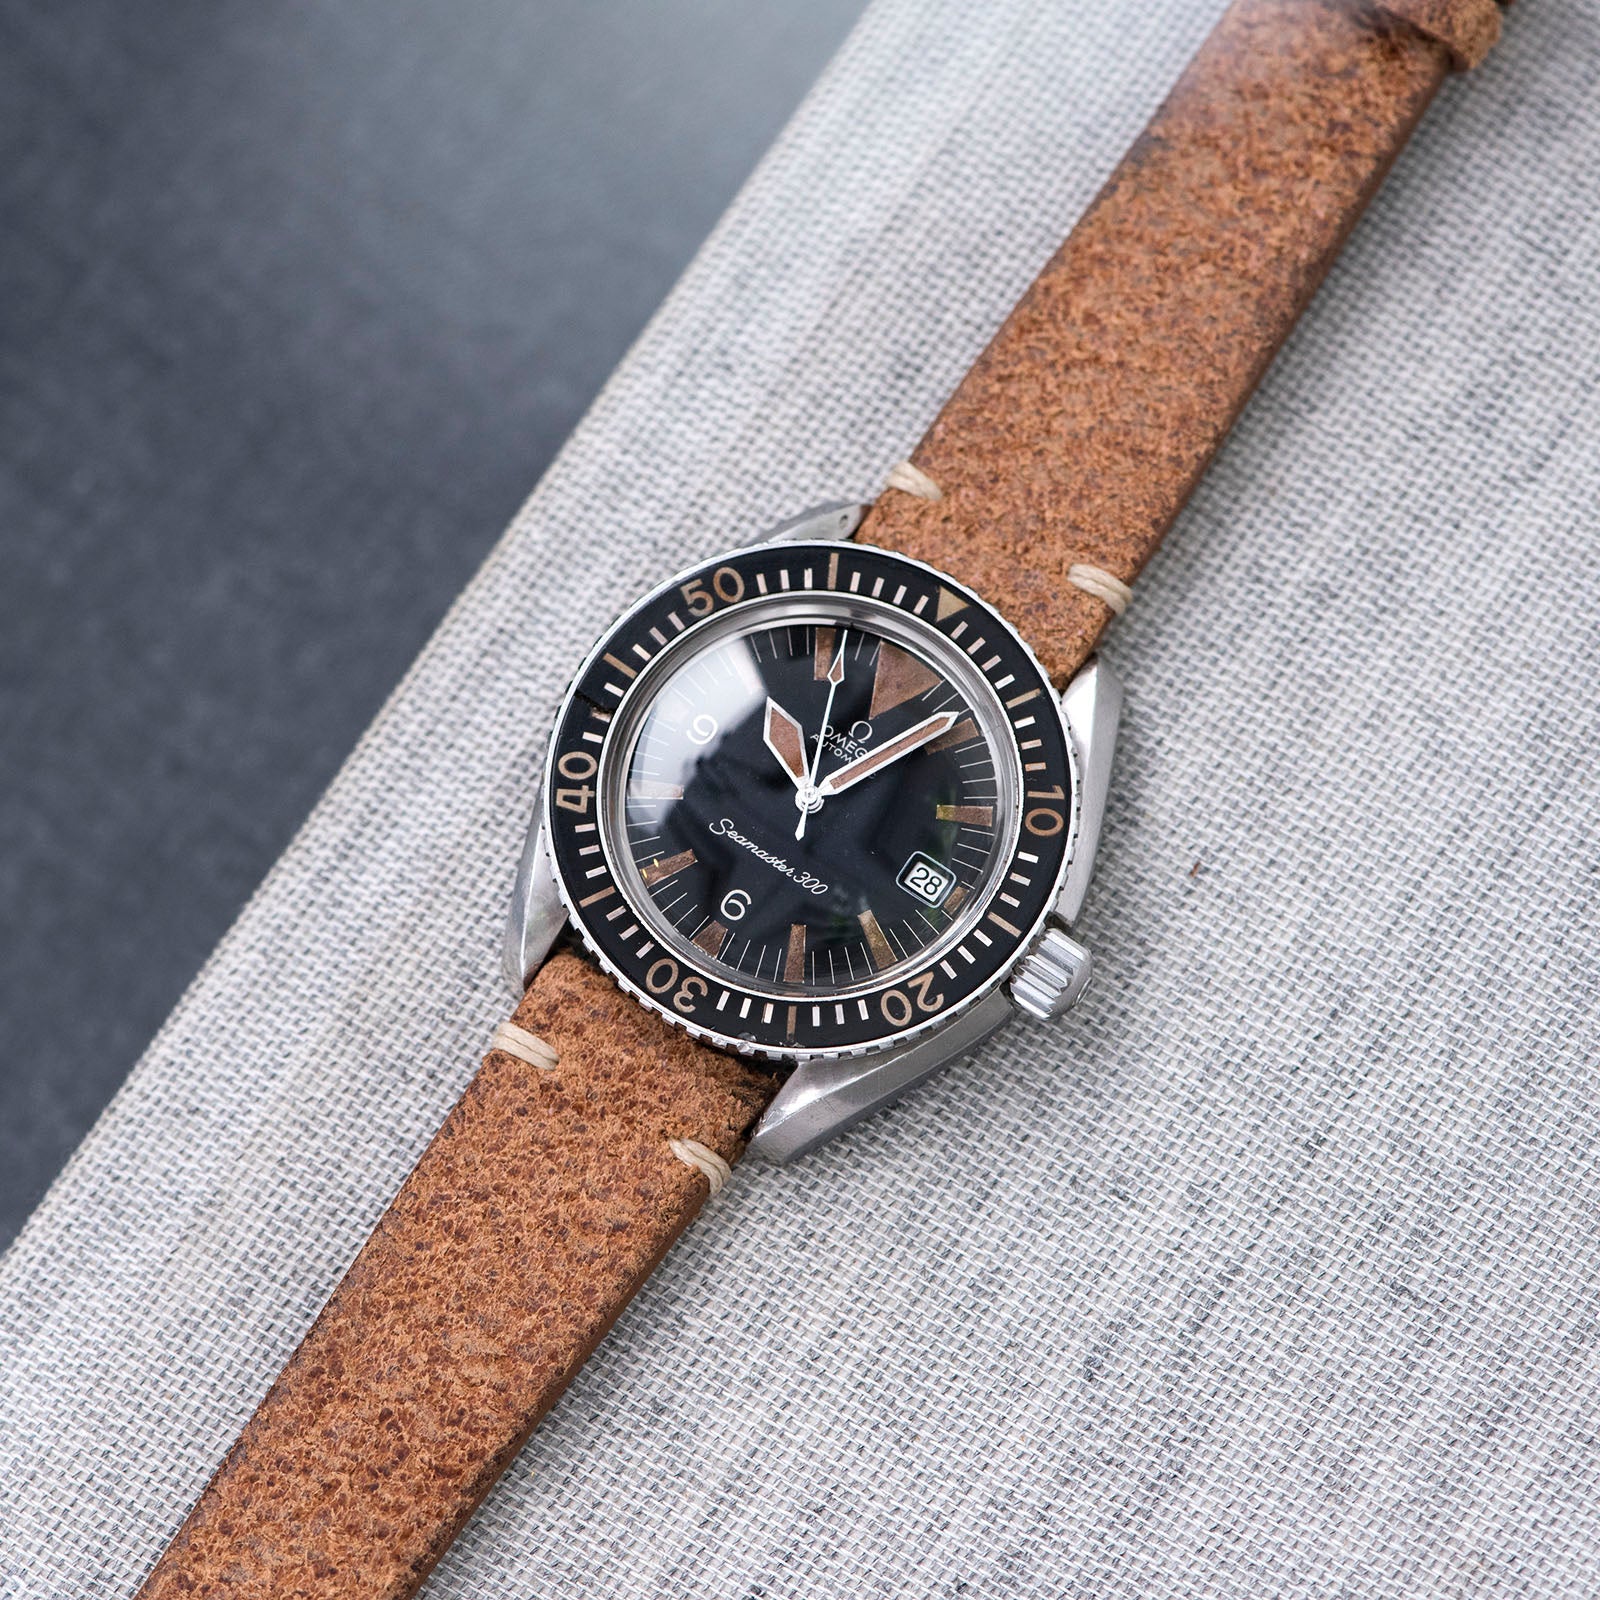 Bulang and Sons_Strap Guide_The omega SM 300 Seamaster_Crackle Brown Leather Watch Strap